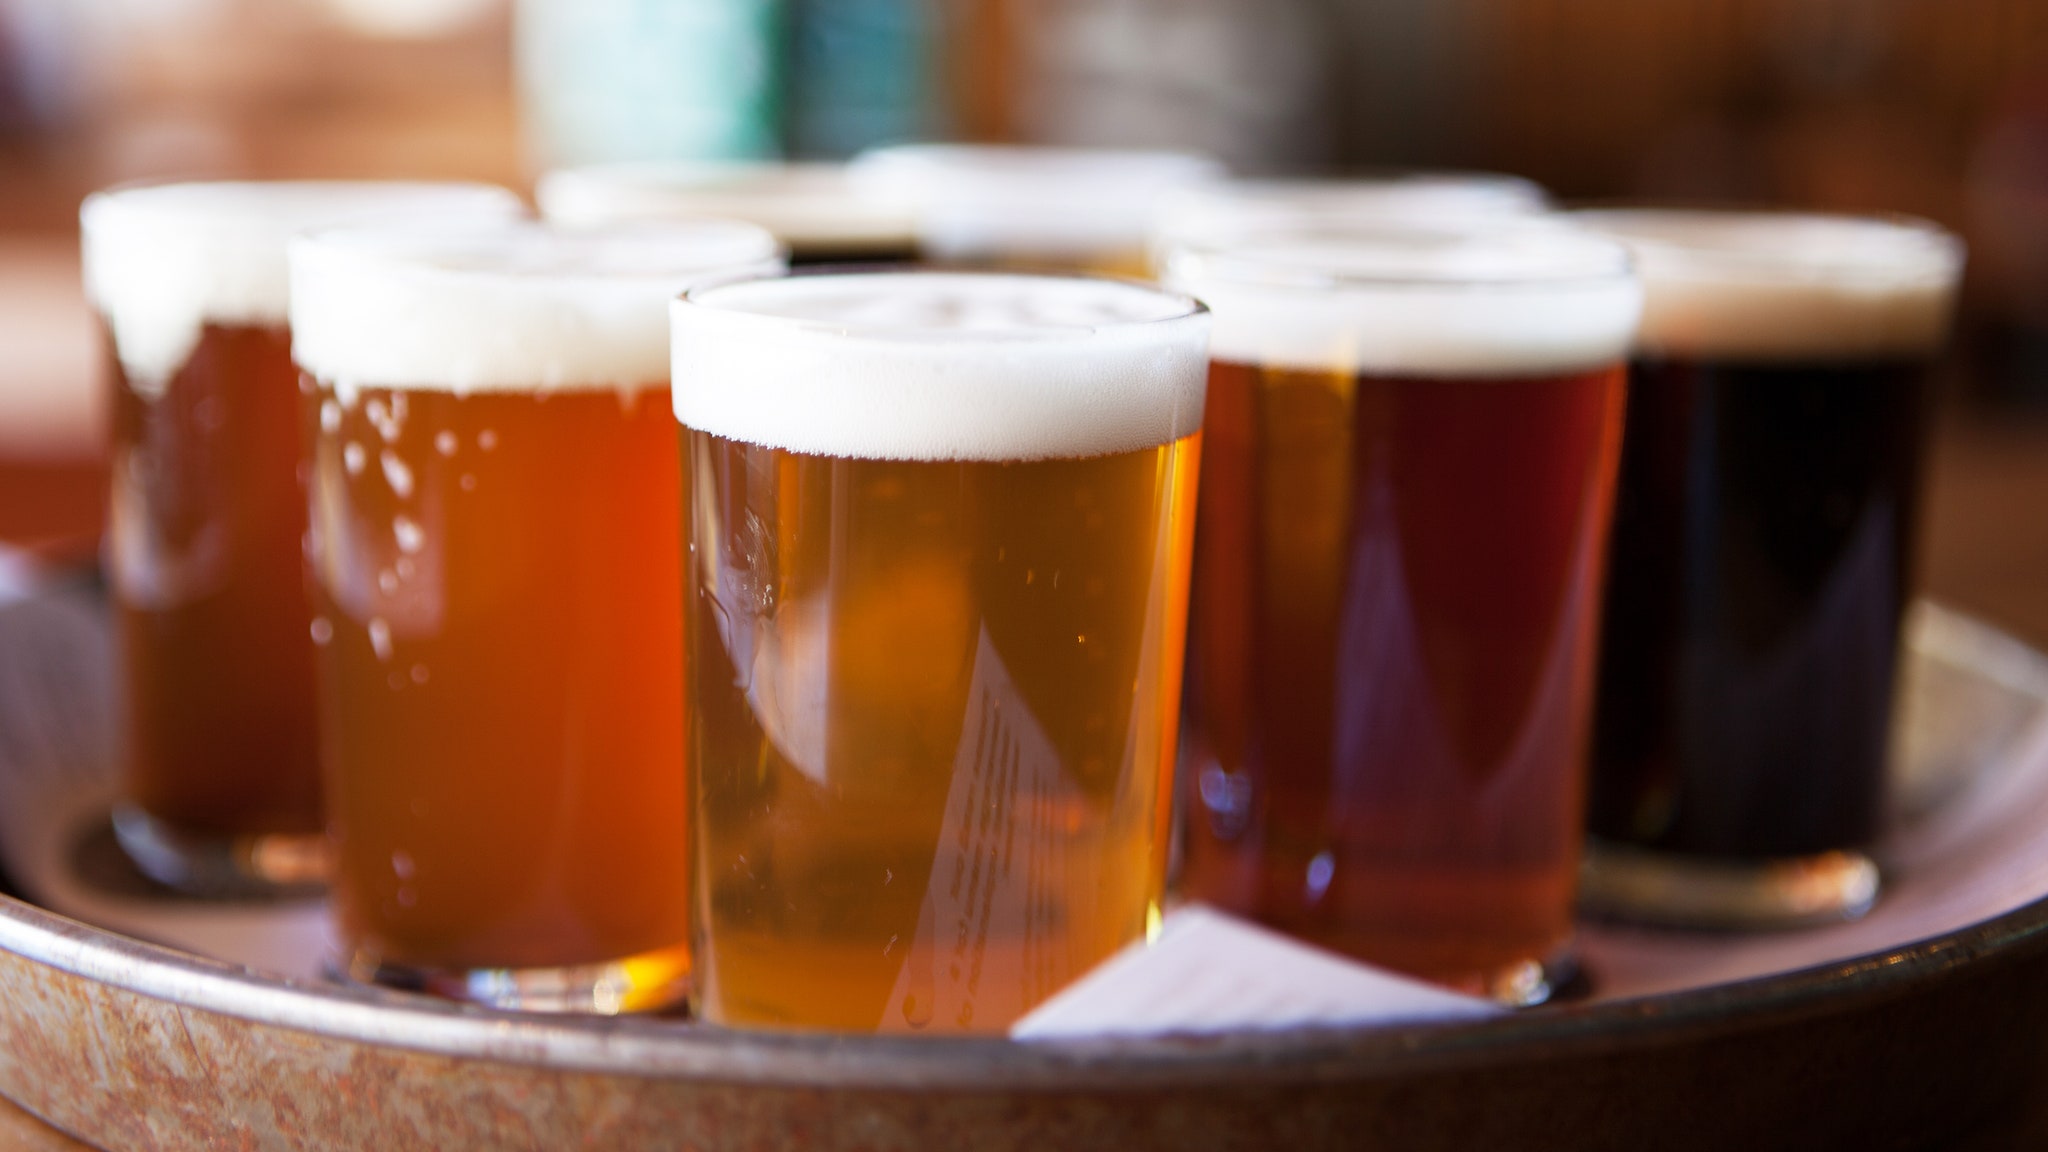 The Top 10 Beer Producing Countries In The World